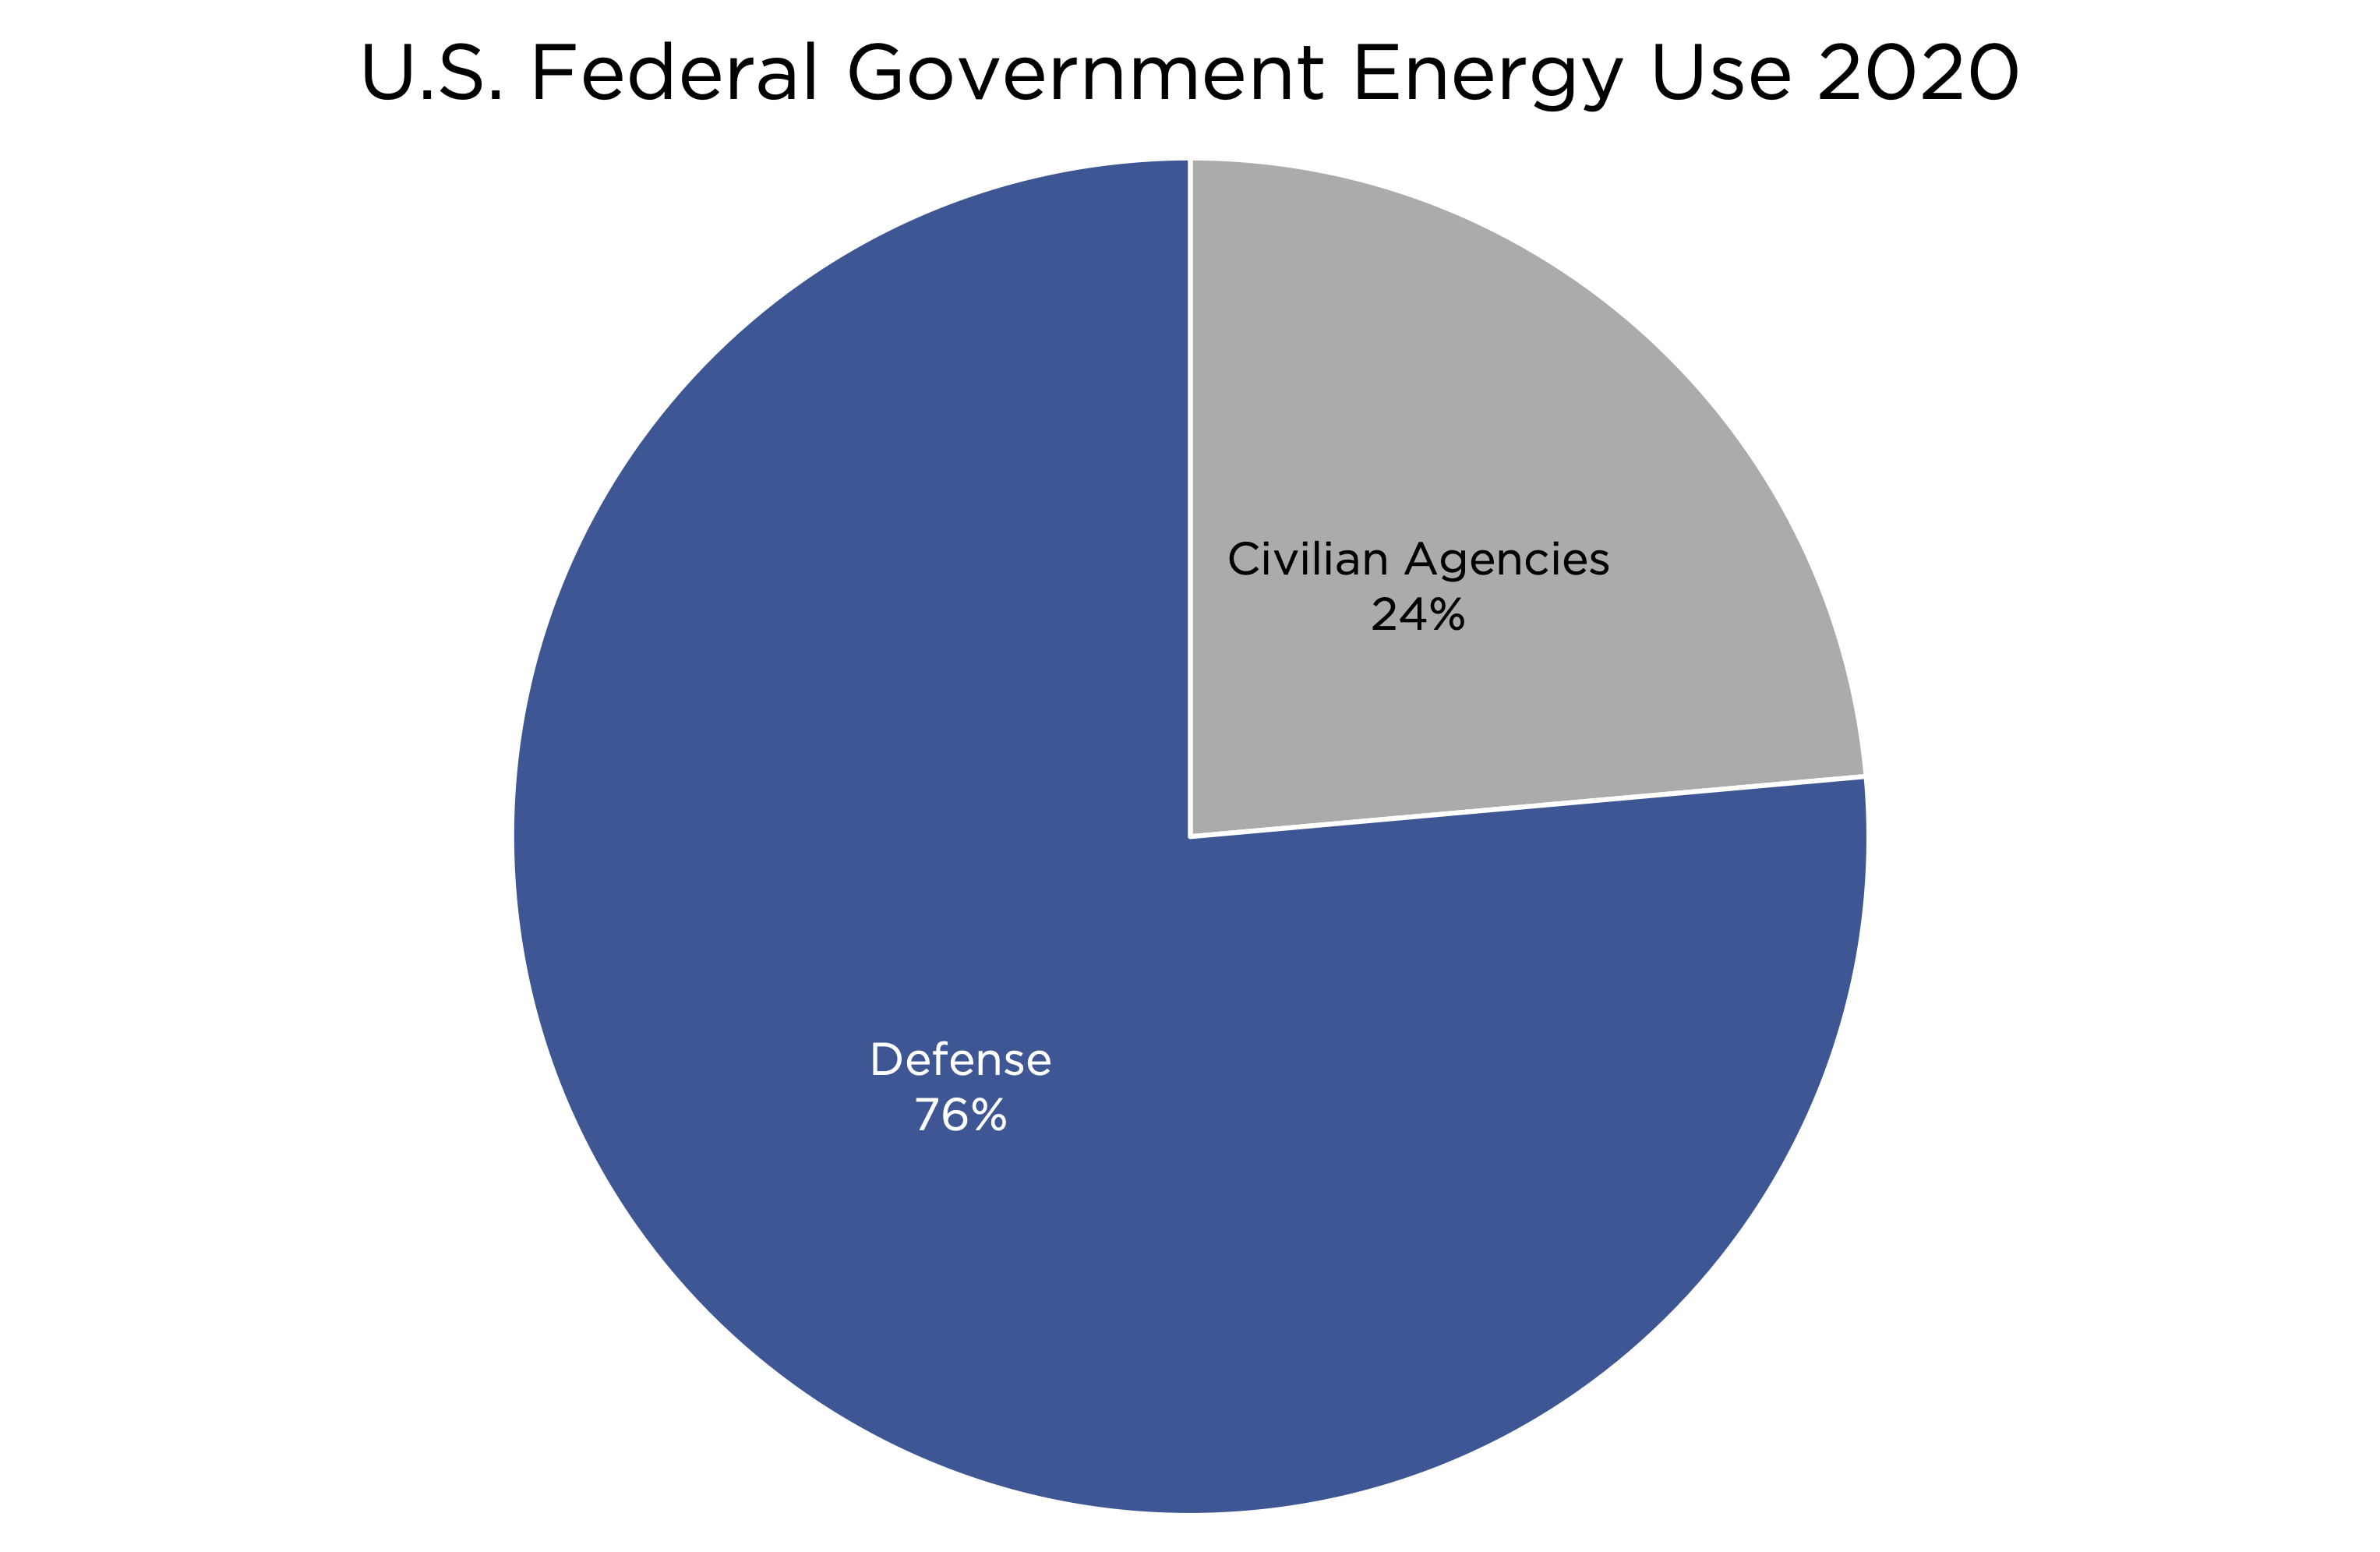 Defense share of energy use